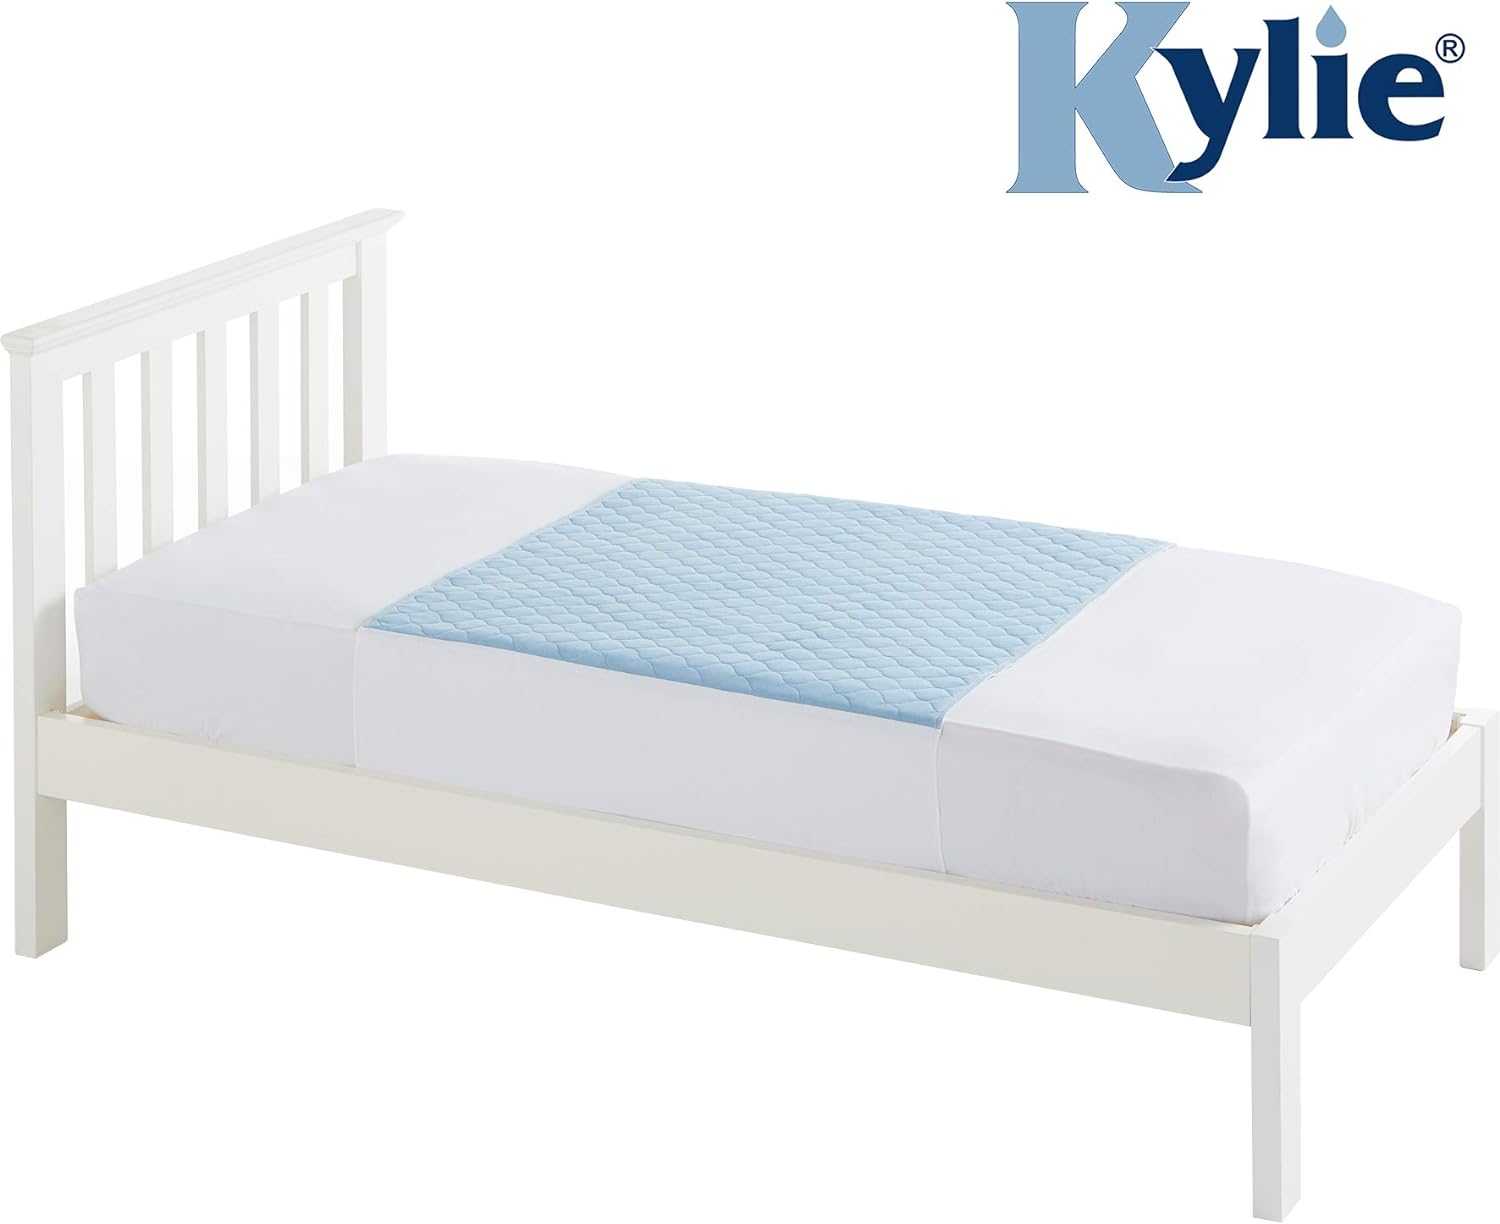 Kylie Premium Bed Pads for Single Bed, Blue, 3 Litre (Eligible for VAT Relief in The UK)